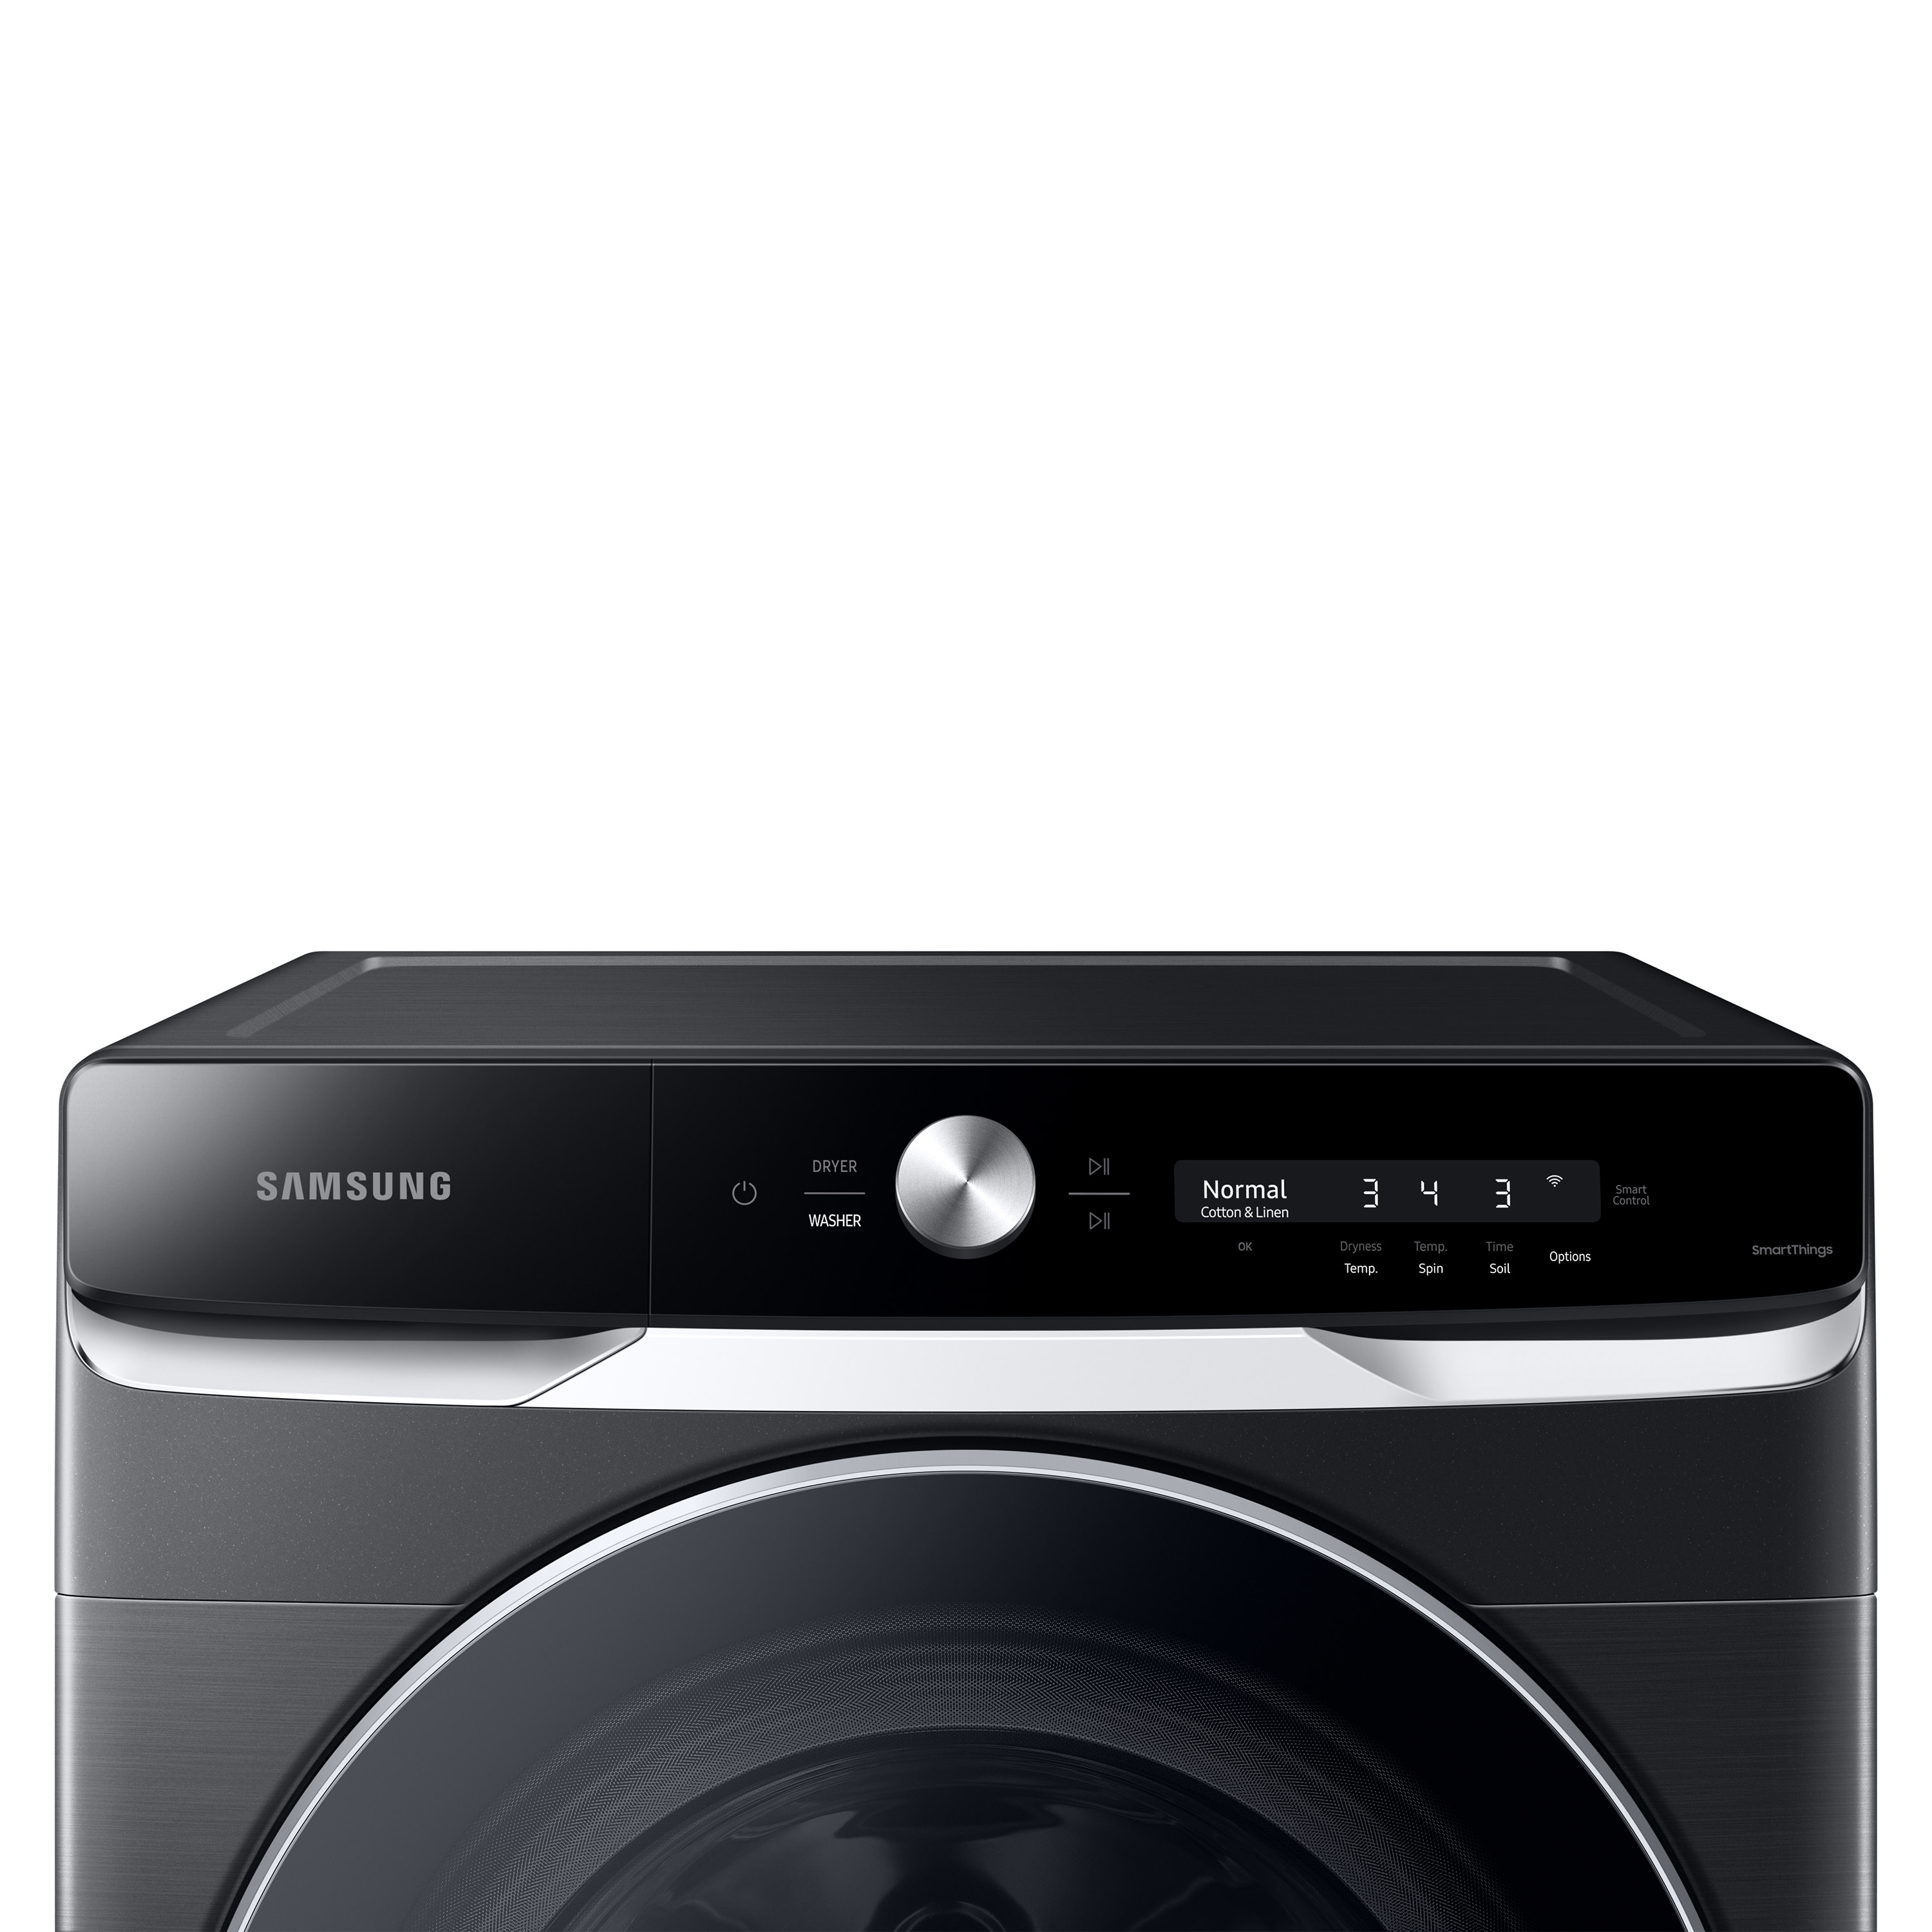  SAMSUNG Laundry MultiControl Kit for Front Load Washer and  Dryer Combo w/ MultiControl Feature, Control Dryer from Stacked Washing  Machine, All Parts Included, DV-MCK/A1 : Appliances